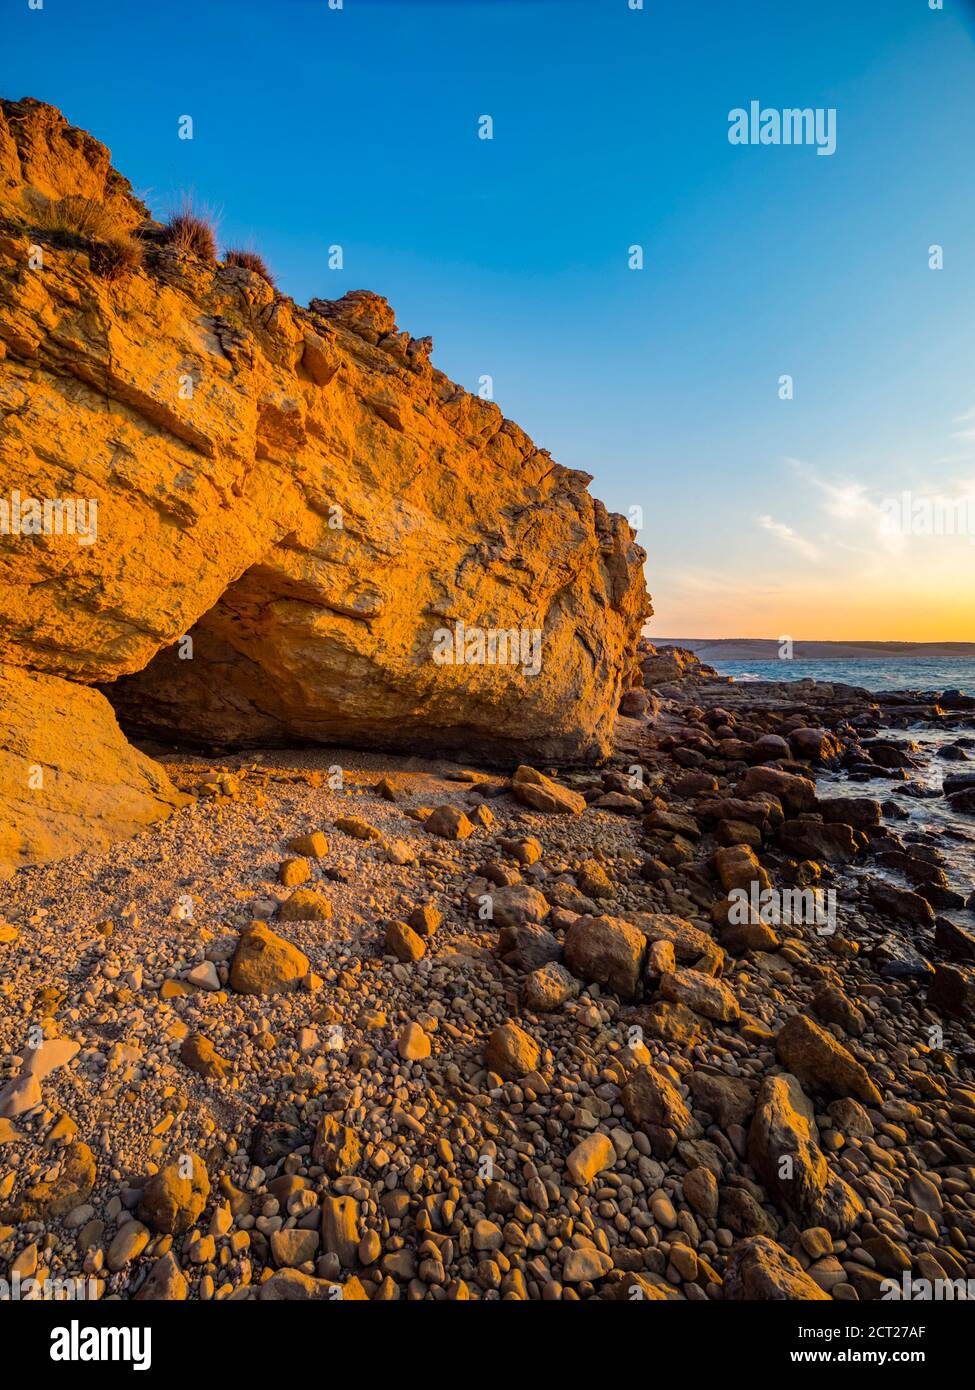 Small cave entrance on beach tertiary marls and sandstones of the Lopar peninsula on Rab island Croatia Europe Stock Photo